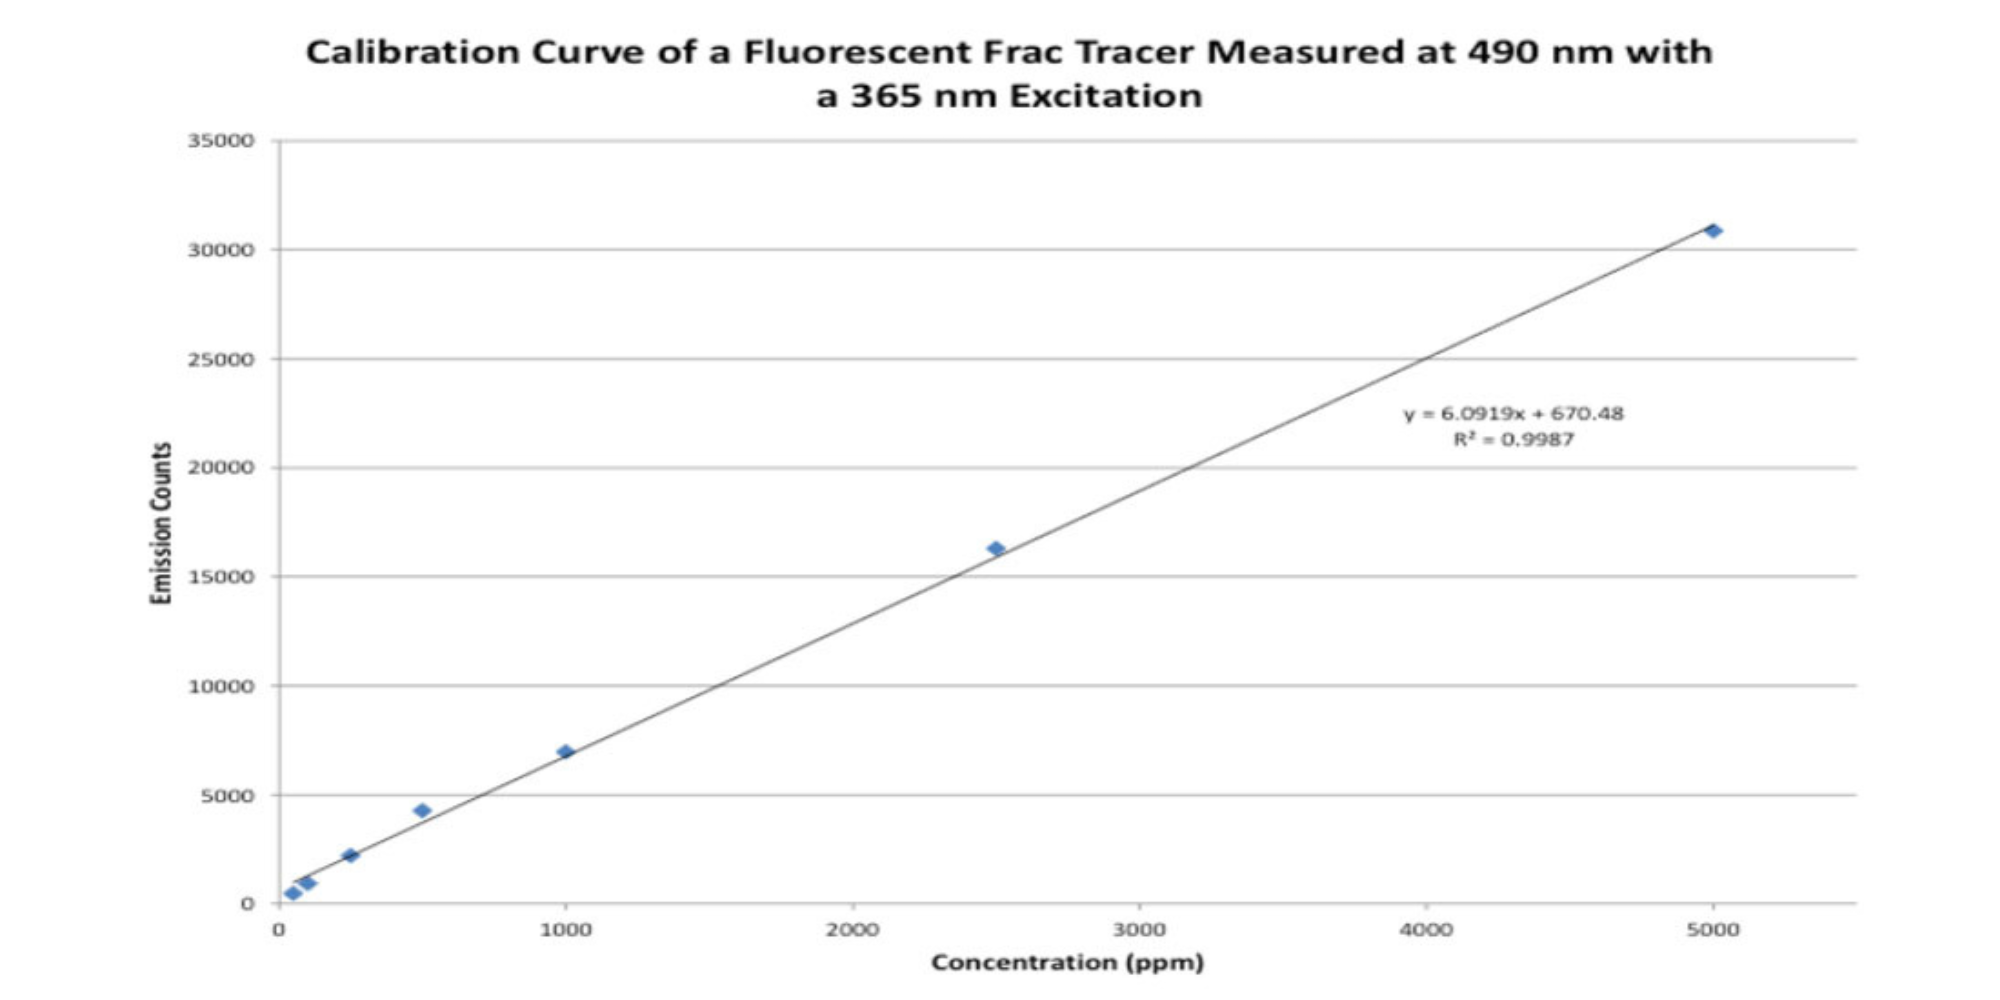 Calibration curve of fluorescent frac tracers; research conducted by Engenium using Wilson’s Instrumentation.